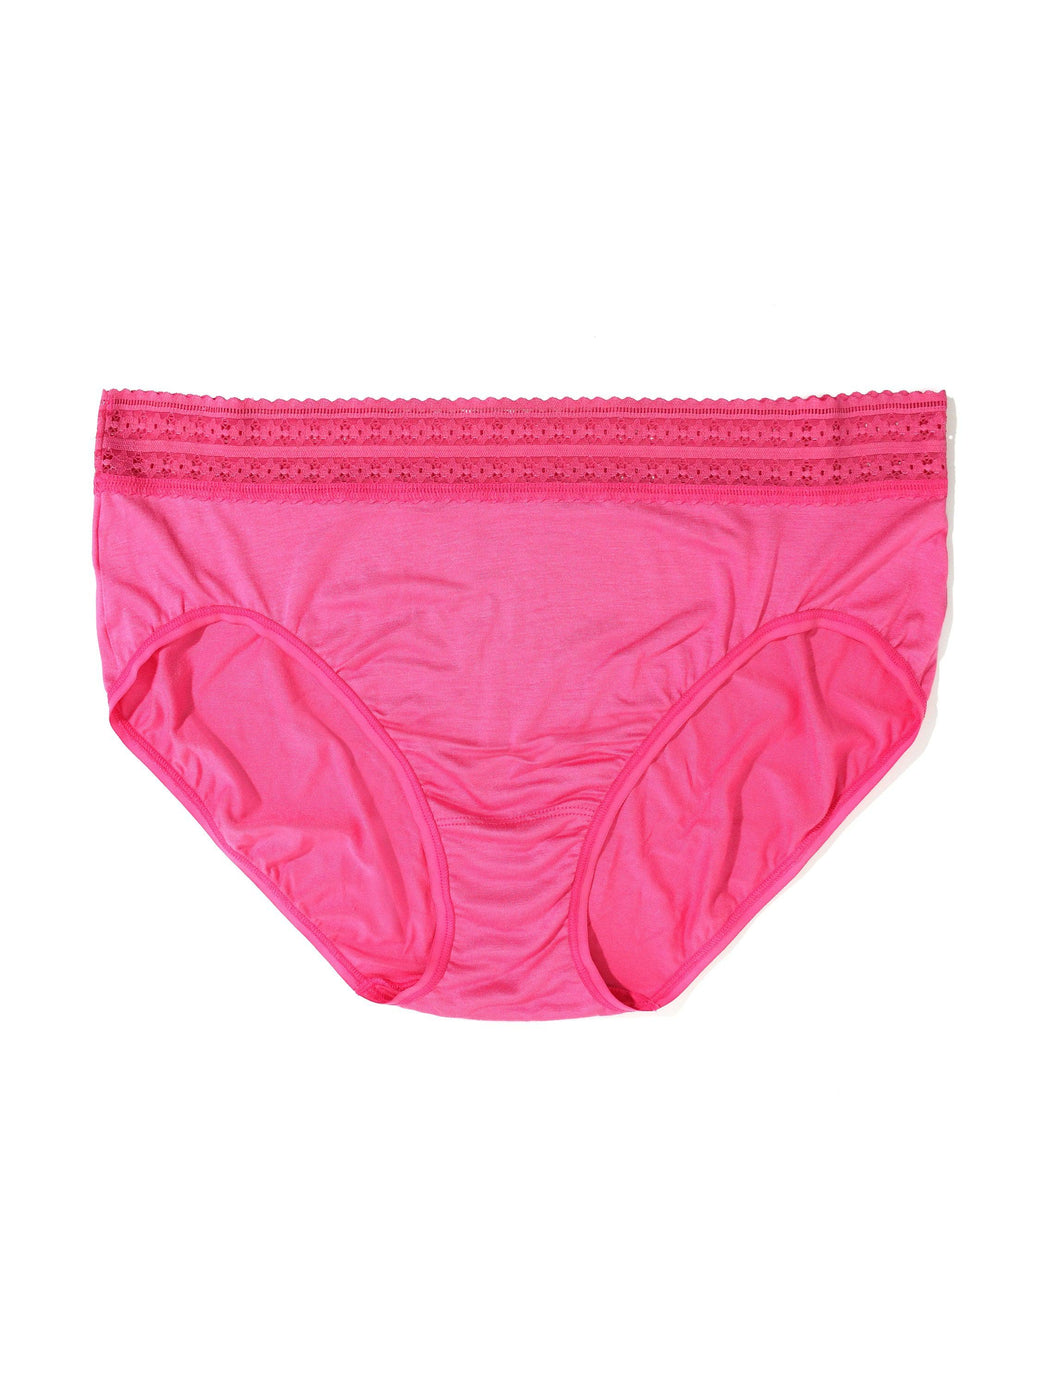 Plus Size DreamEase™ French Brief Exclusive Kiss From A Rose Pink